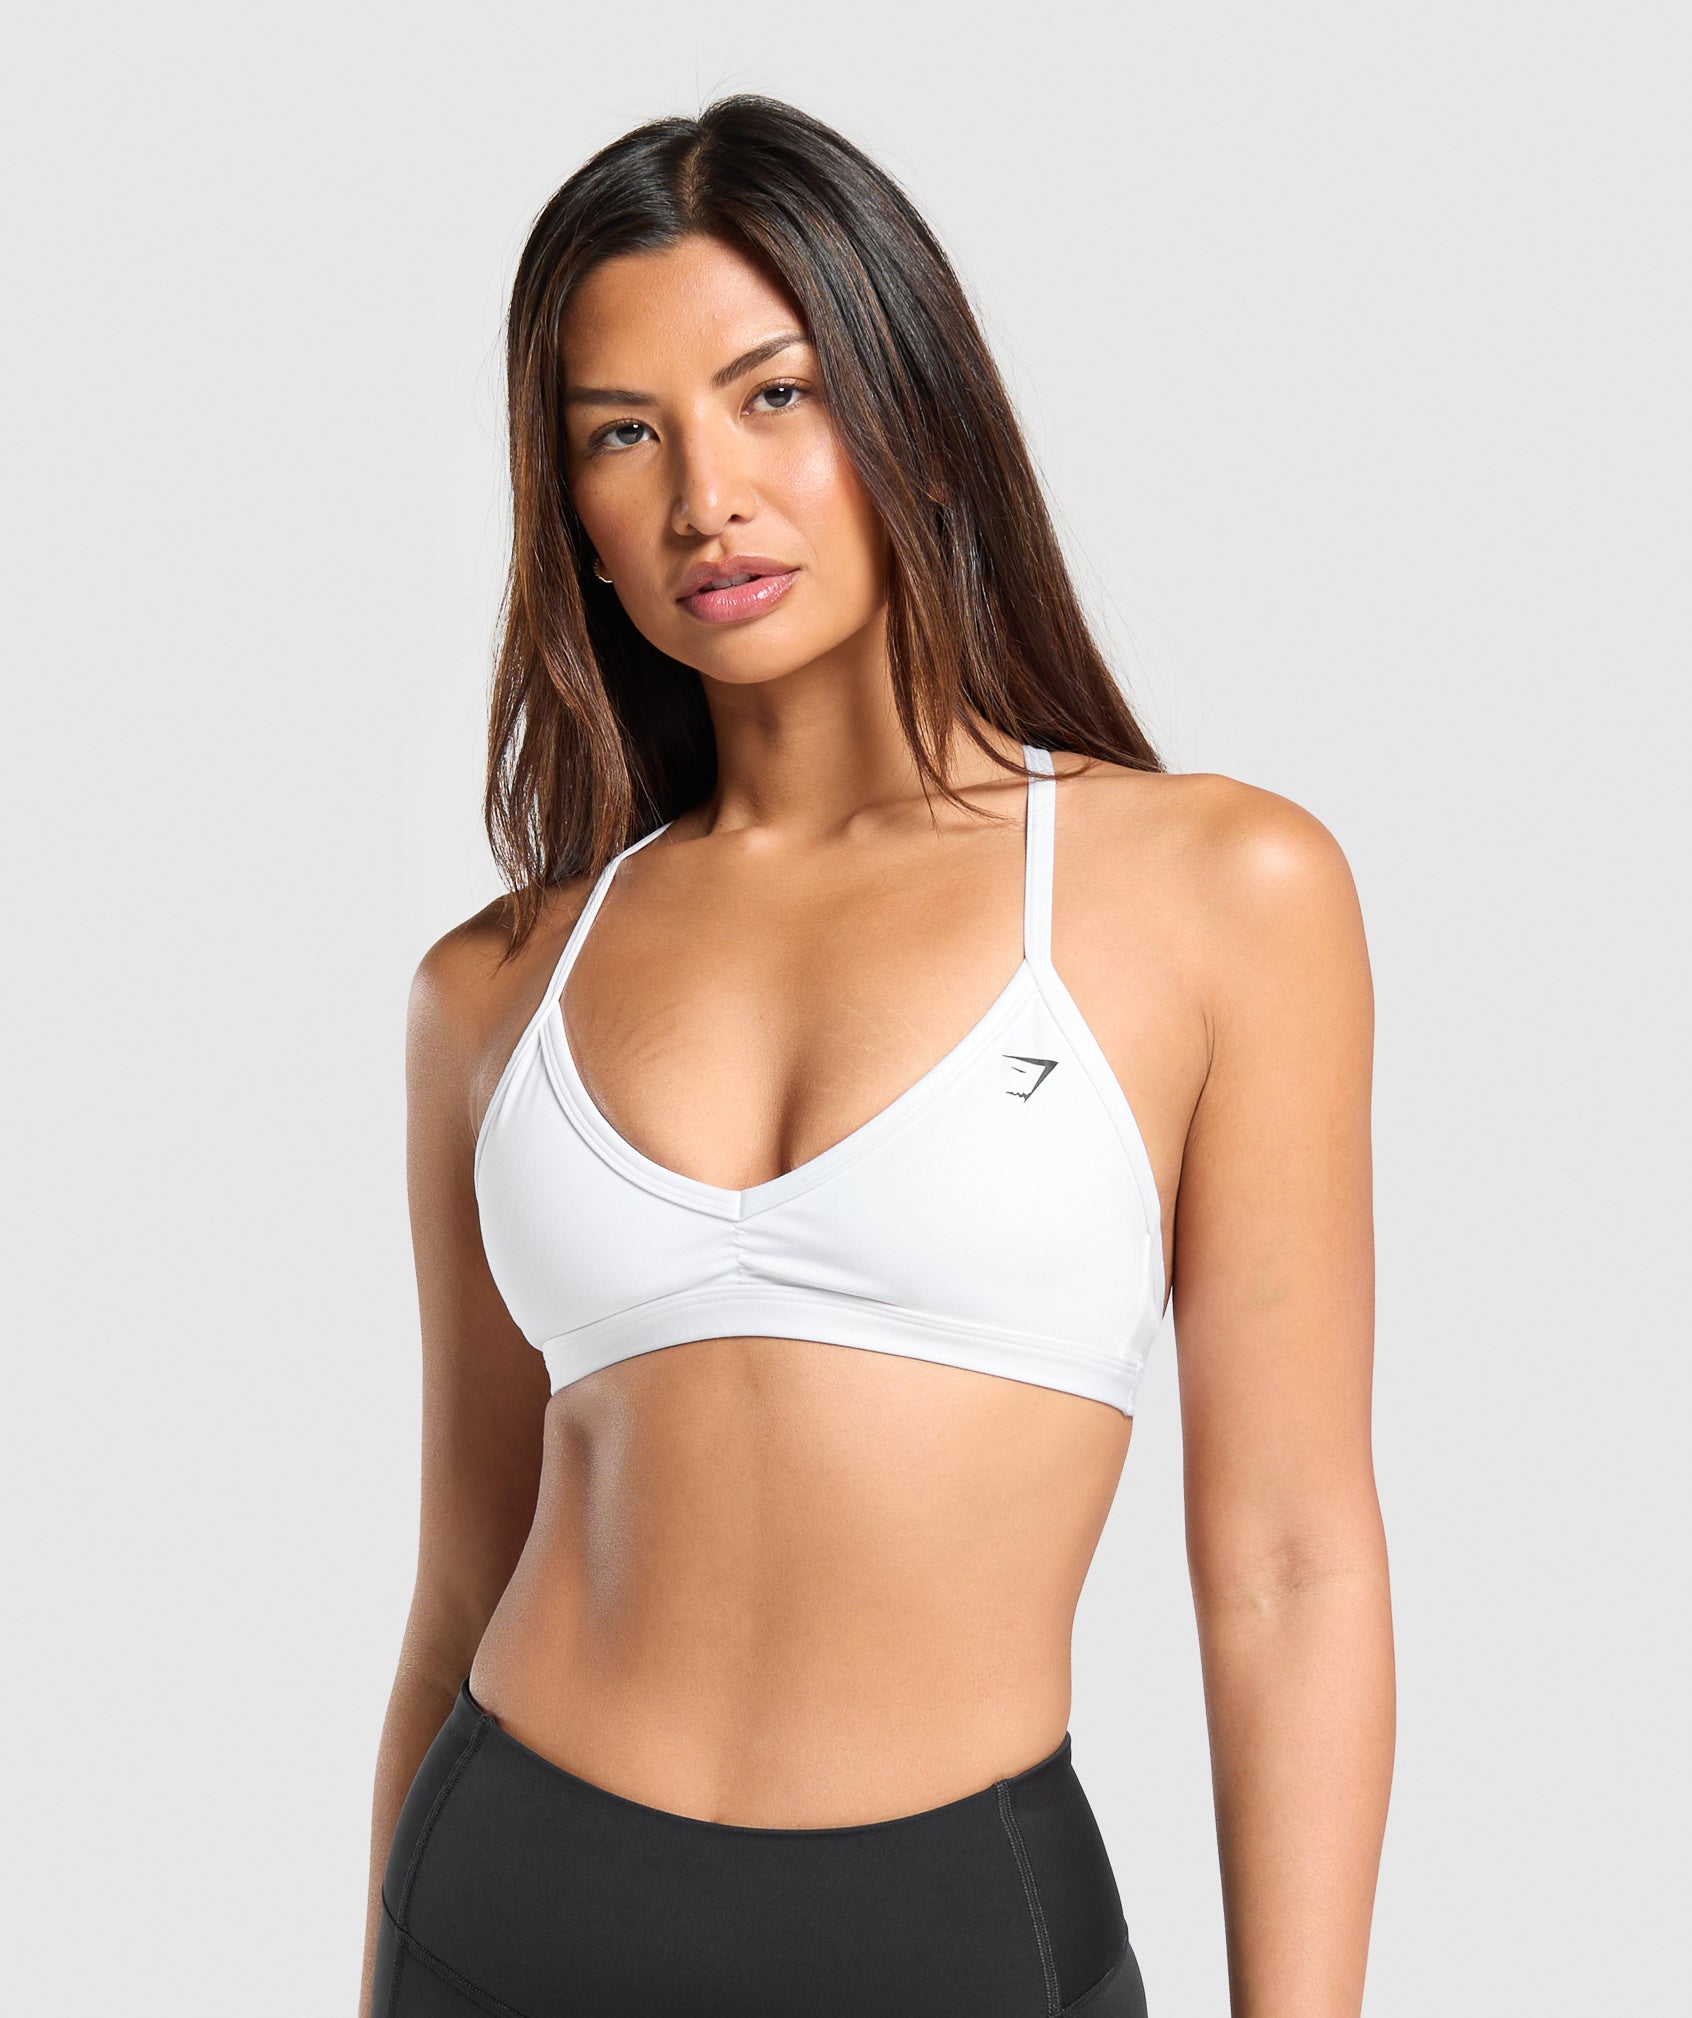 Minimal Sports Bra in White is out of stock